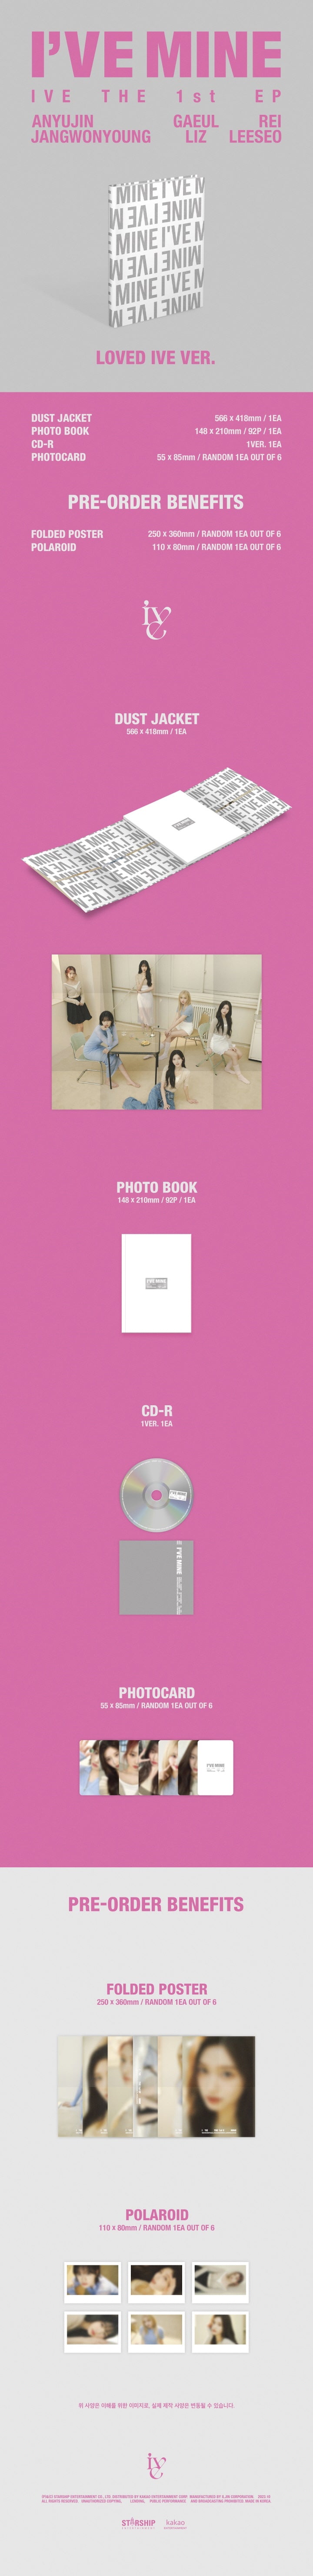 1 CD
1 Dust Jacket
1 Photo Book (92 pages)
1 Photo Card (random out of 6 types)